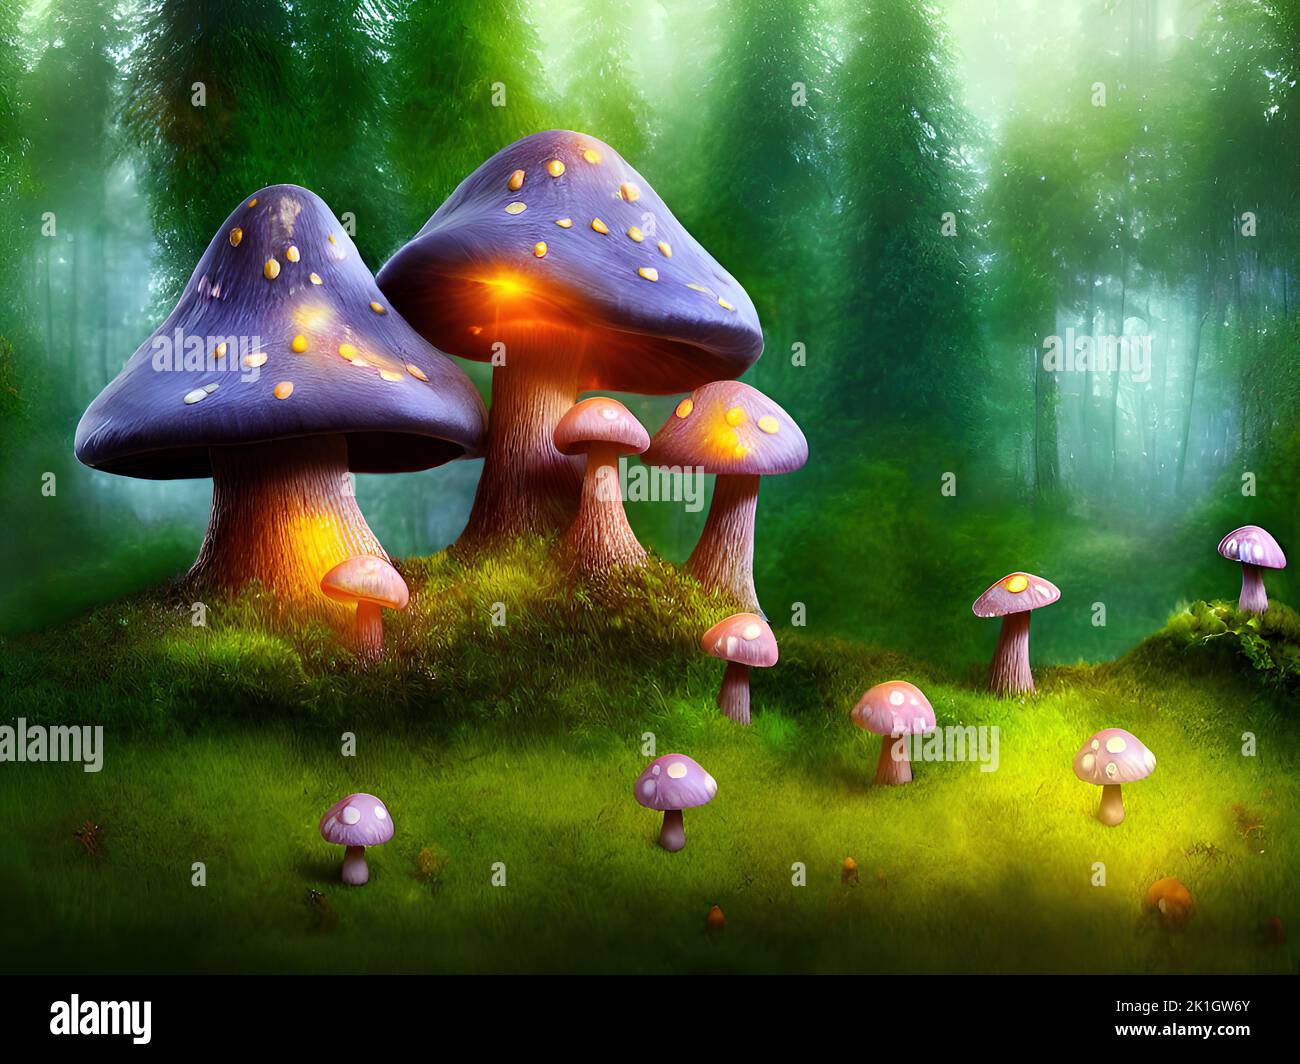 3d rendering of fantasy mushroom cottages in magical forest Stock Photo